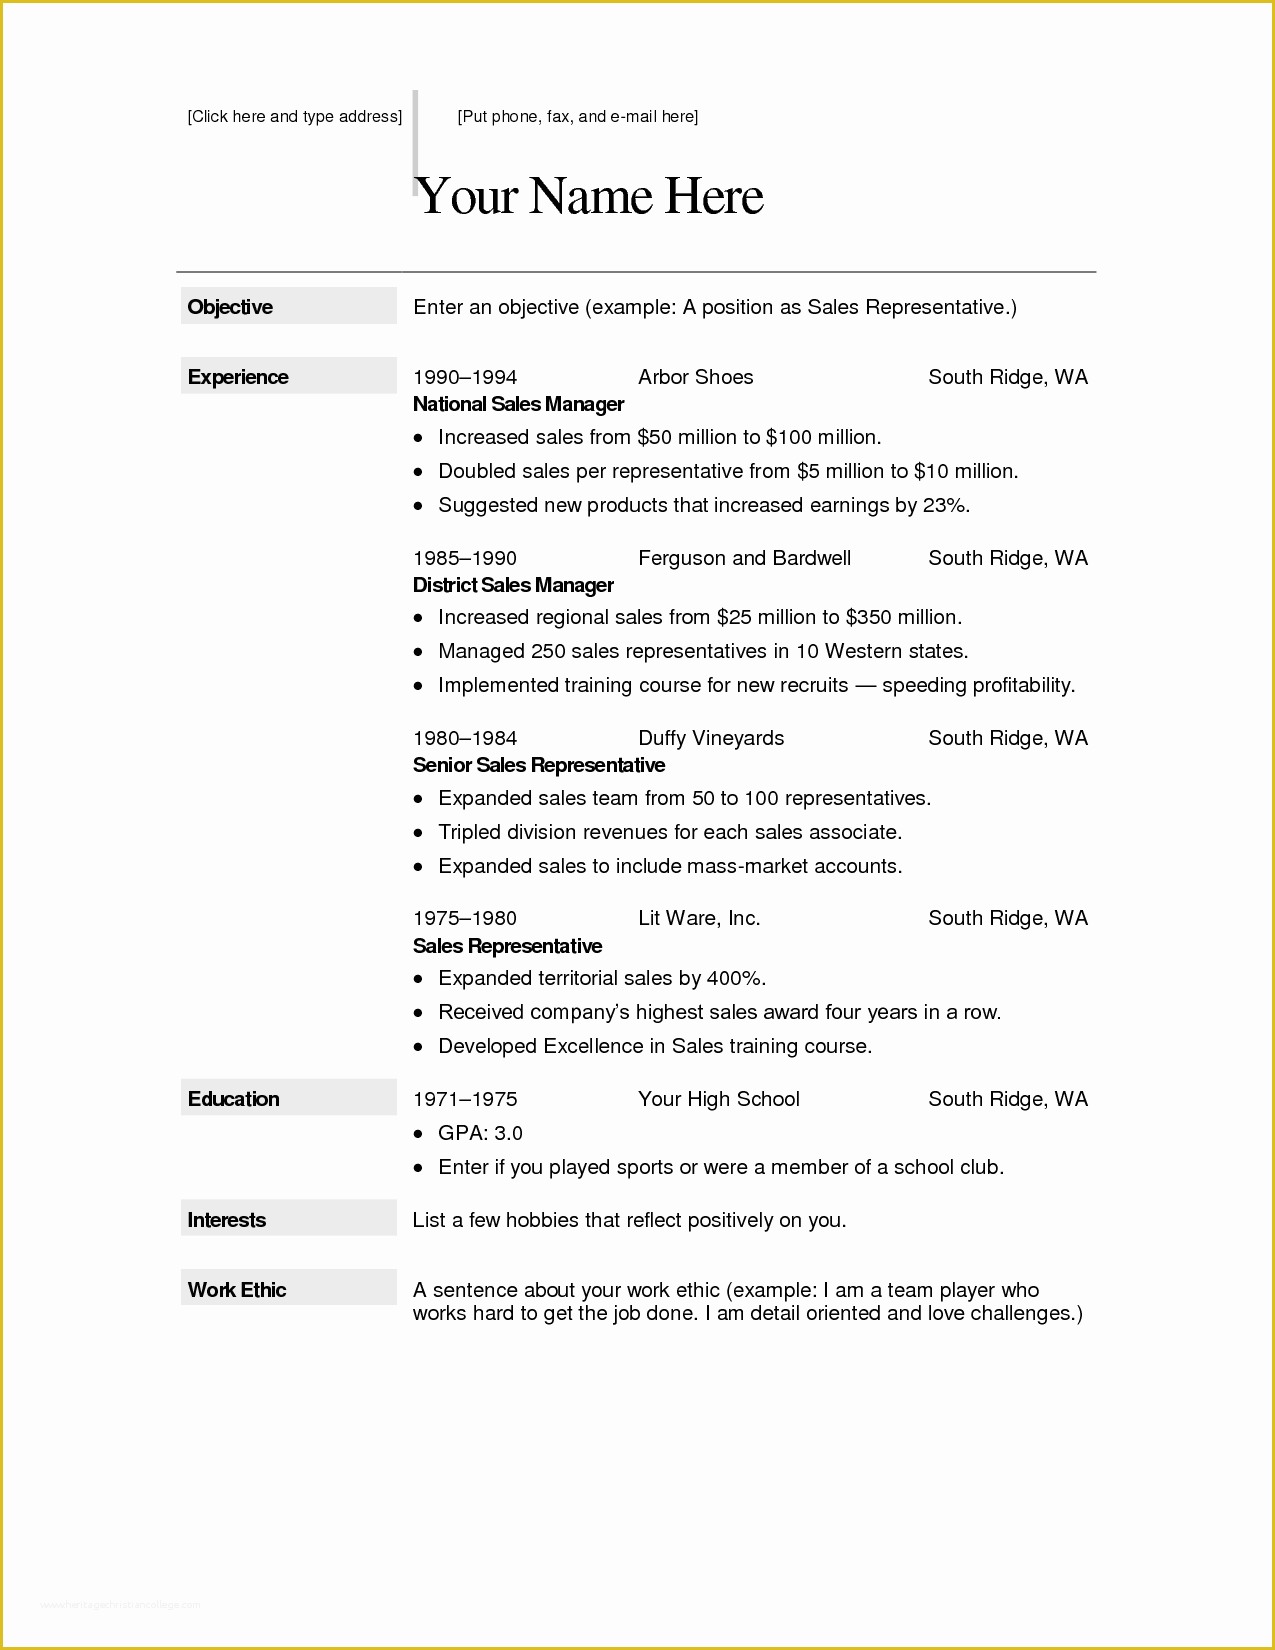 Free Resume Templates for Mac Pages Of Free Creative Resume Templates for Macfree Creative Resume